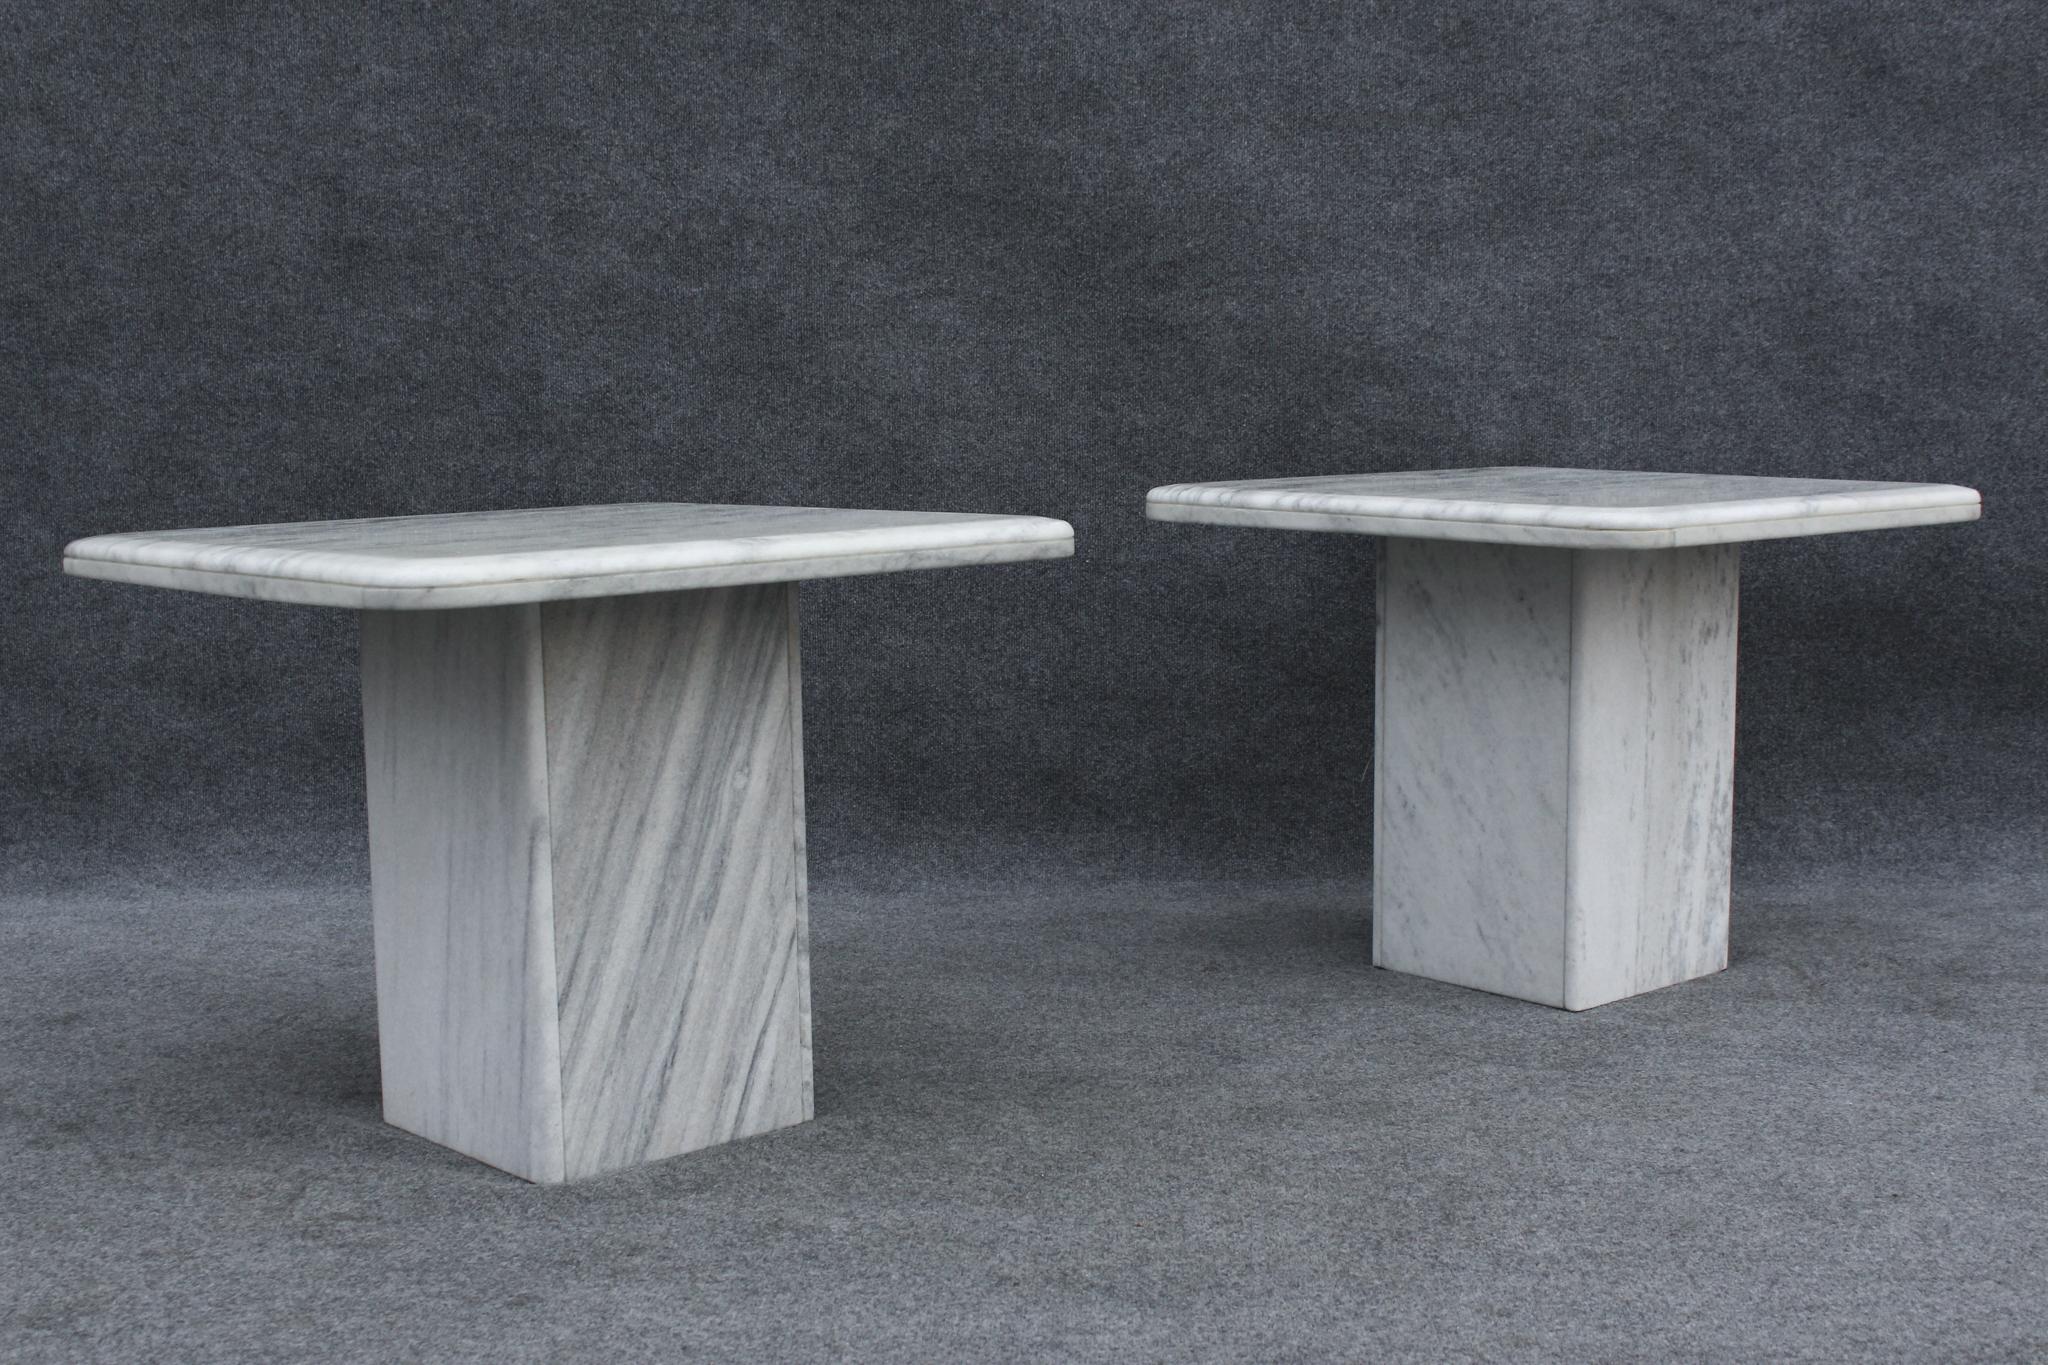 Pair of Italian Side Tables in White Marble With Grey Veining 1970s For Sale 8